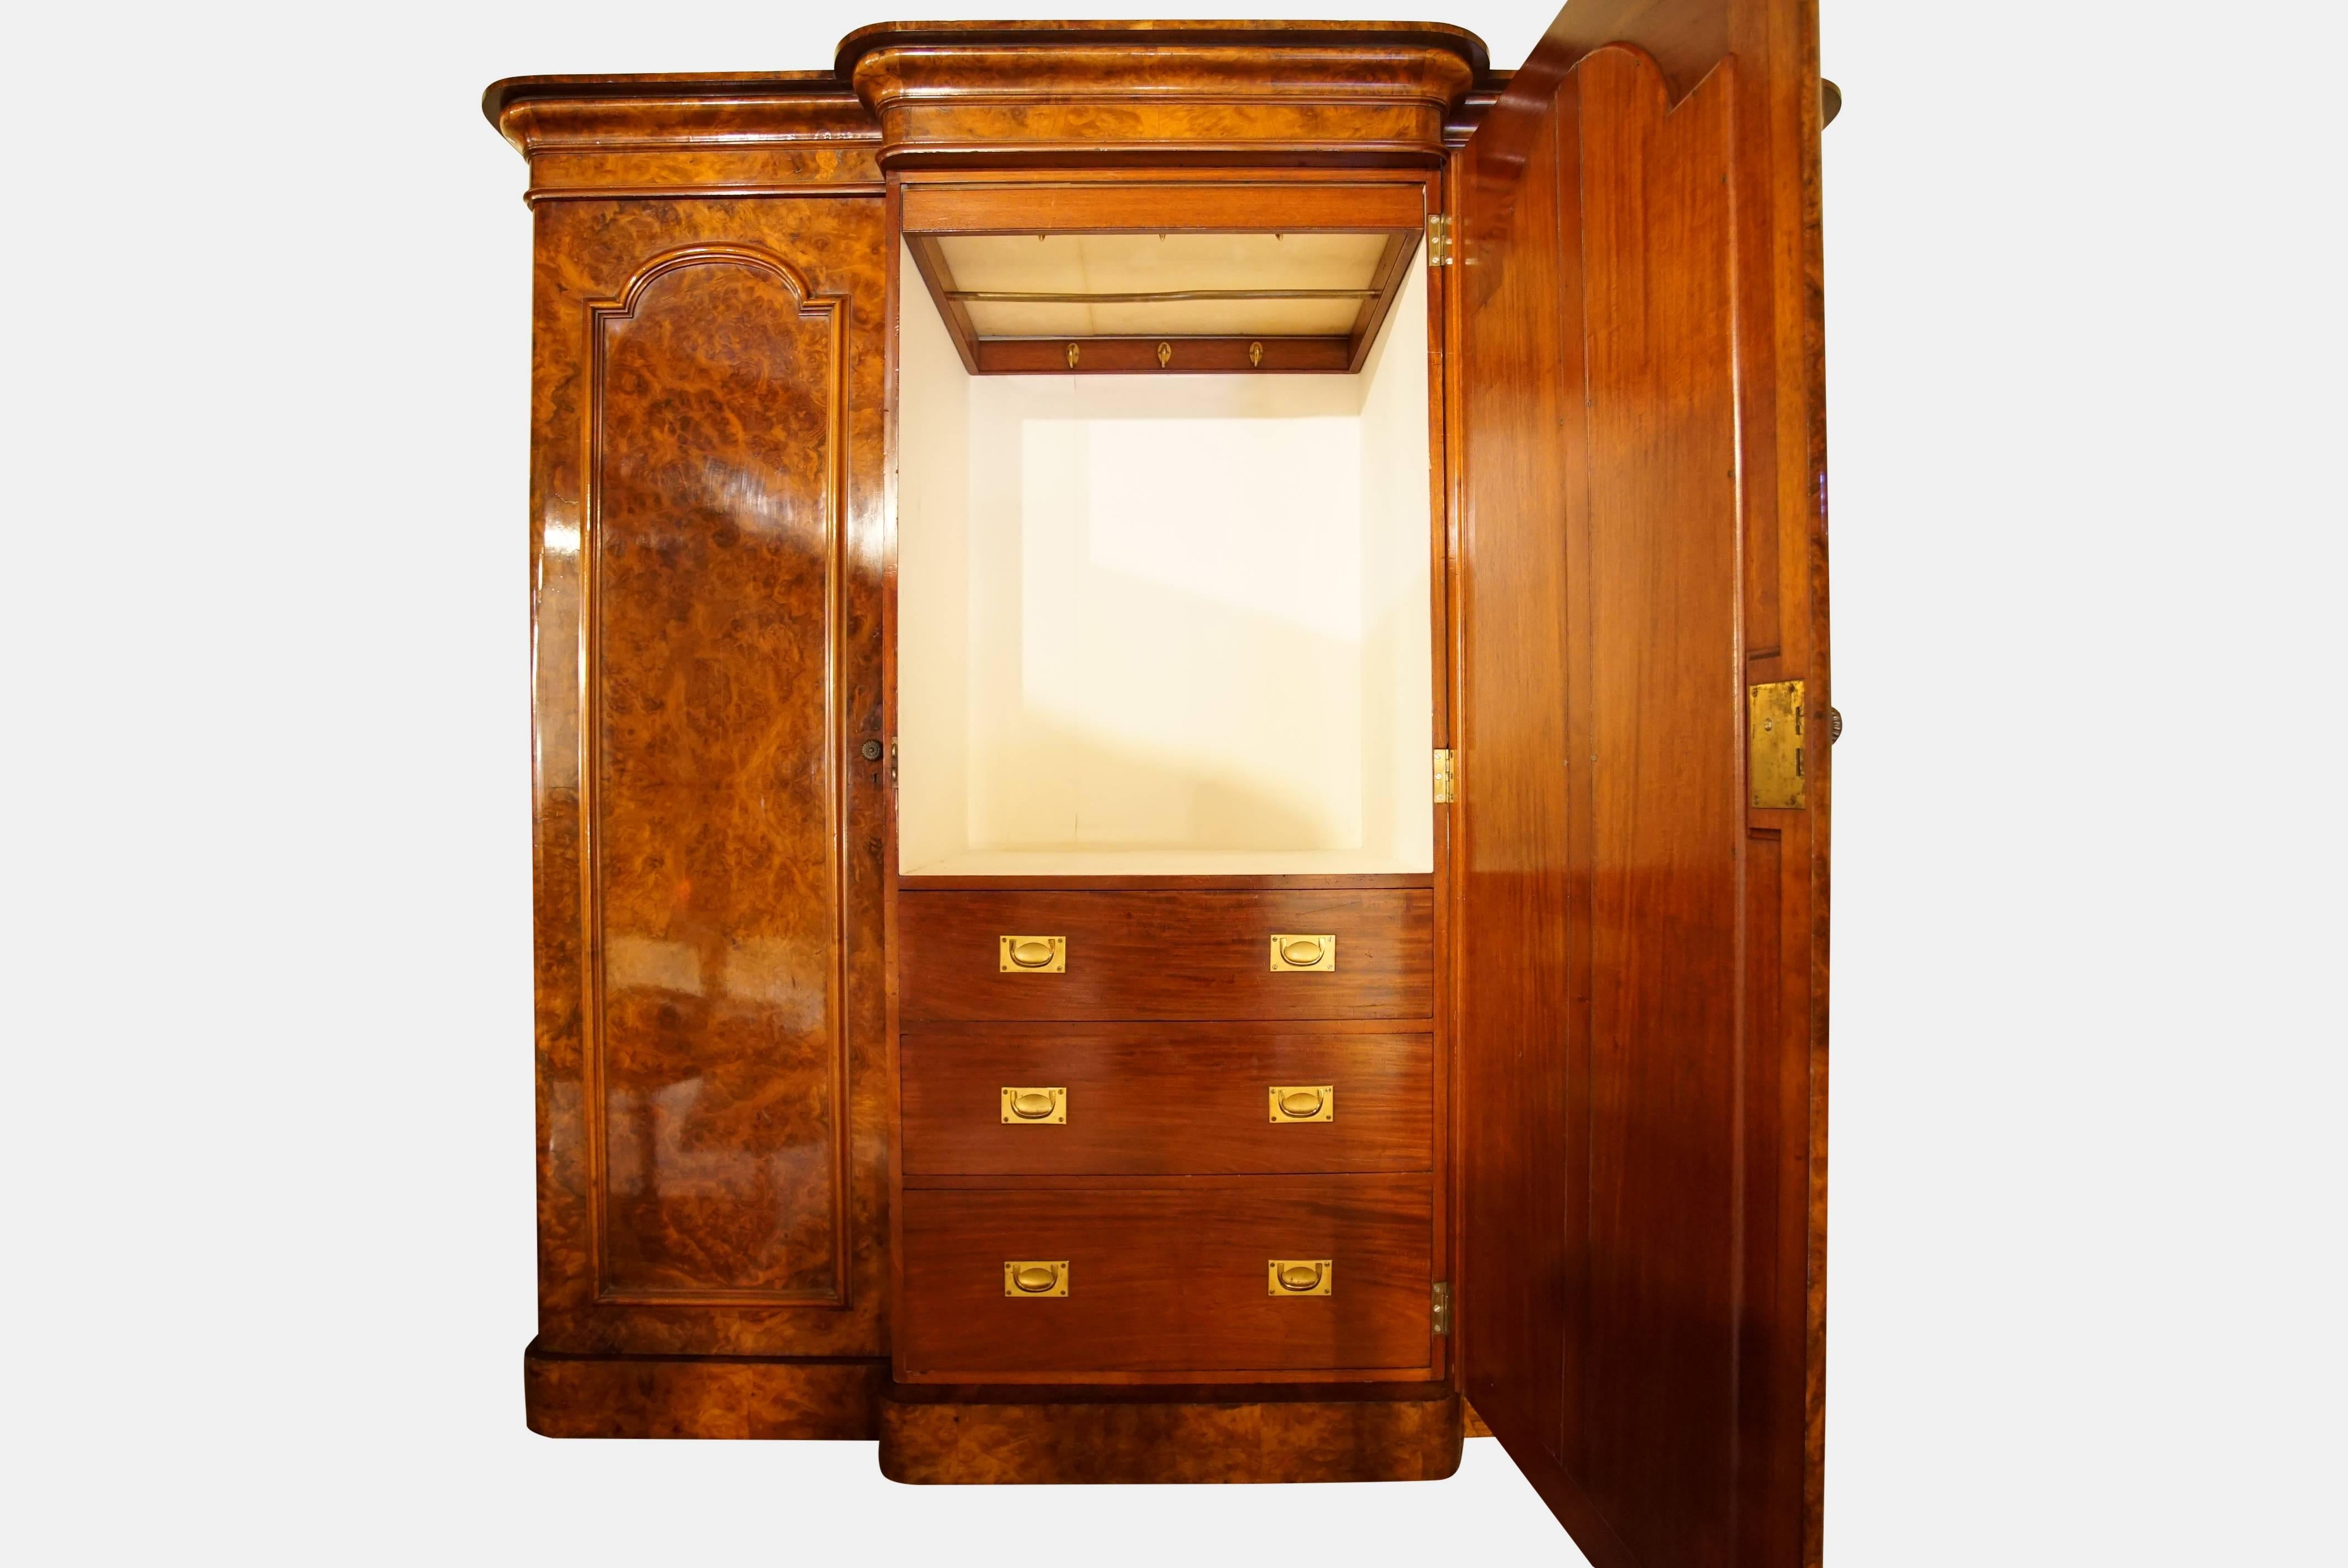 Victorian walnut three-door breakfront wardrobe with molded cornice and plain plinth base. The central mirrored door encloses a fitted interior - a bank of 3 drawers below a pull out hanging rail. The left and right doors enclose a single hanging